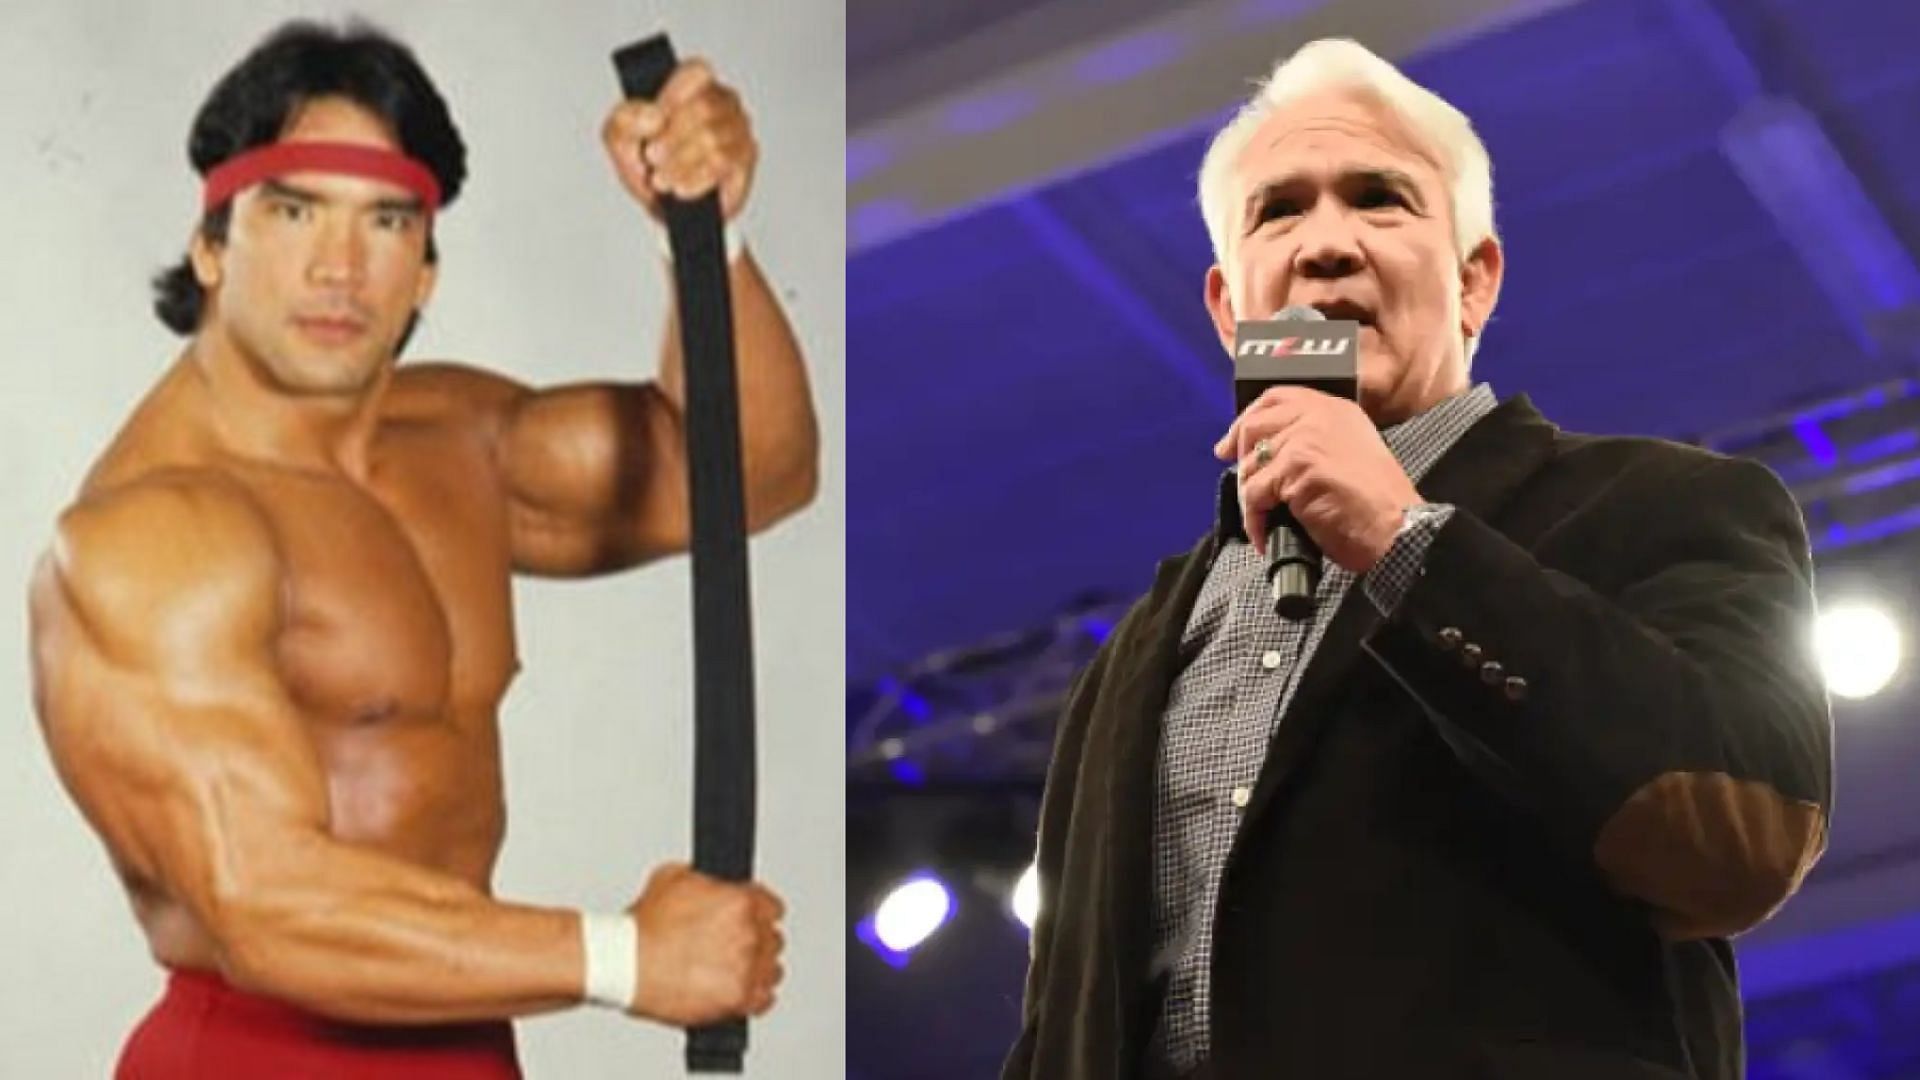 Ricky Steamboat is a WWE Hall of Famer and one of the greatest of all time